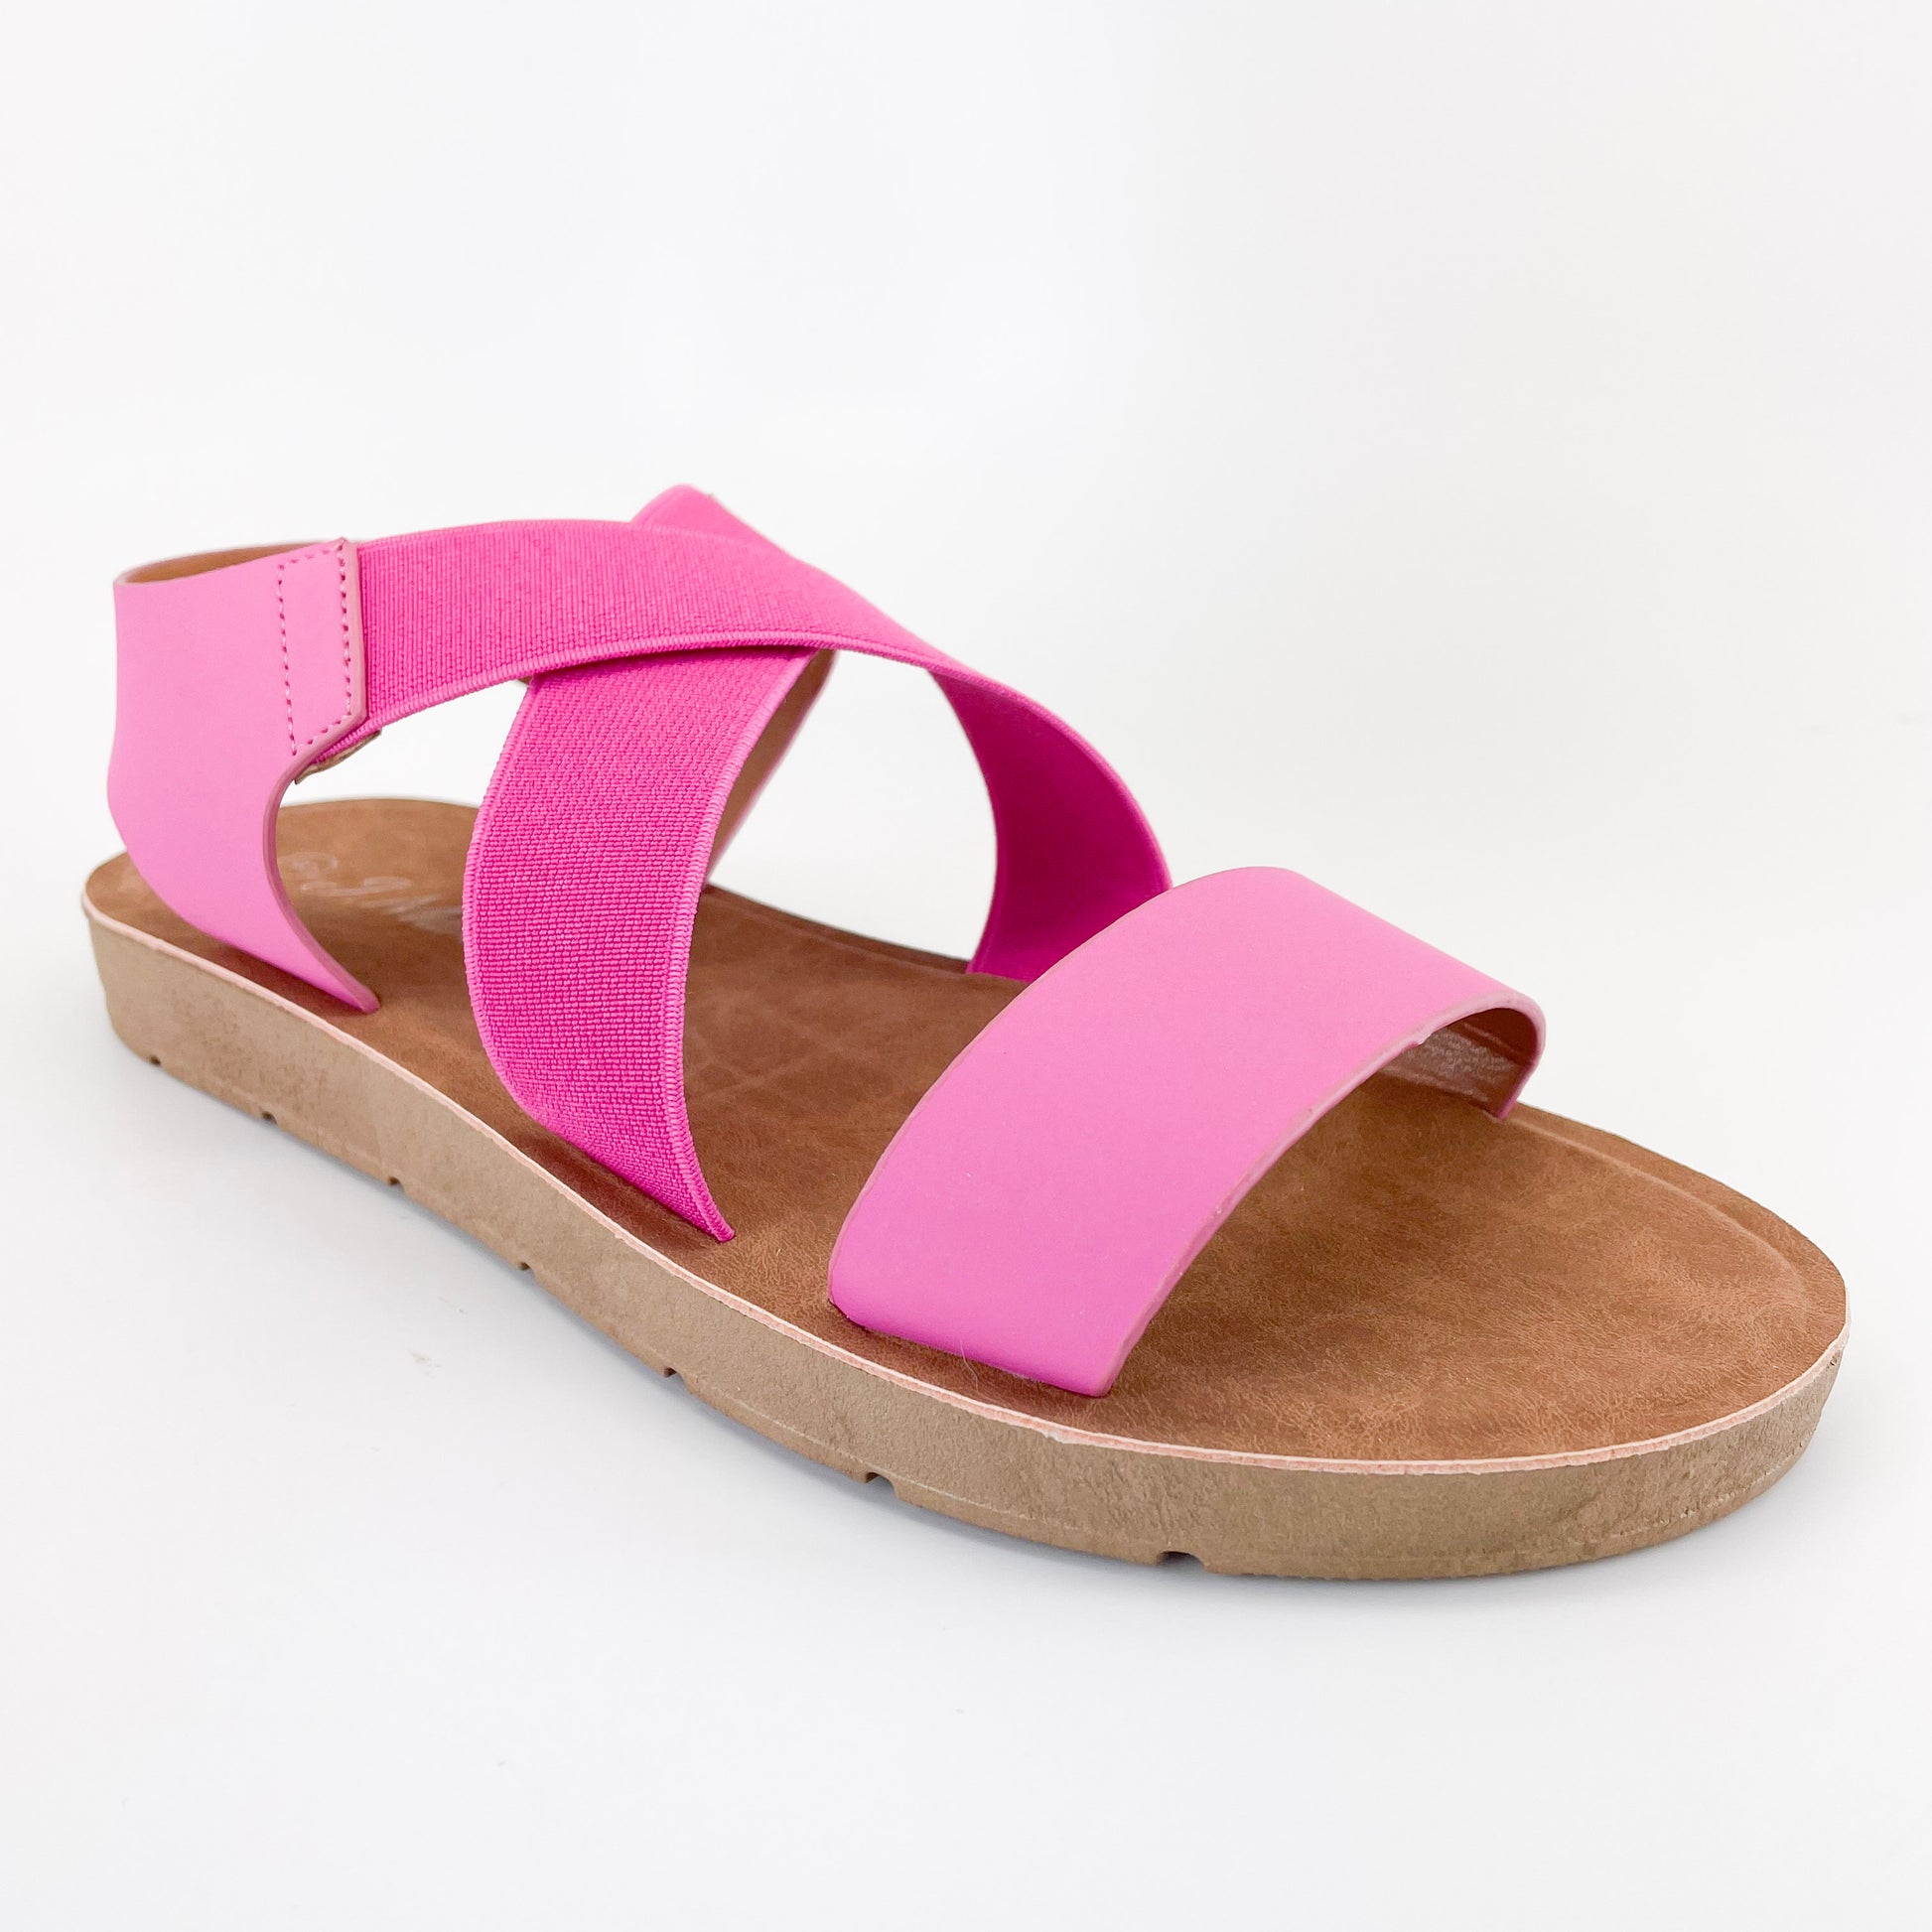 j. mark form-901 fuchsia women sandals with stretchable criss cross straps